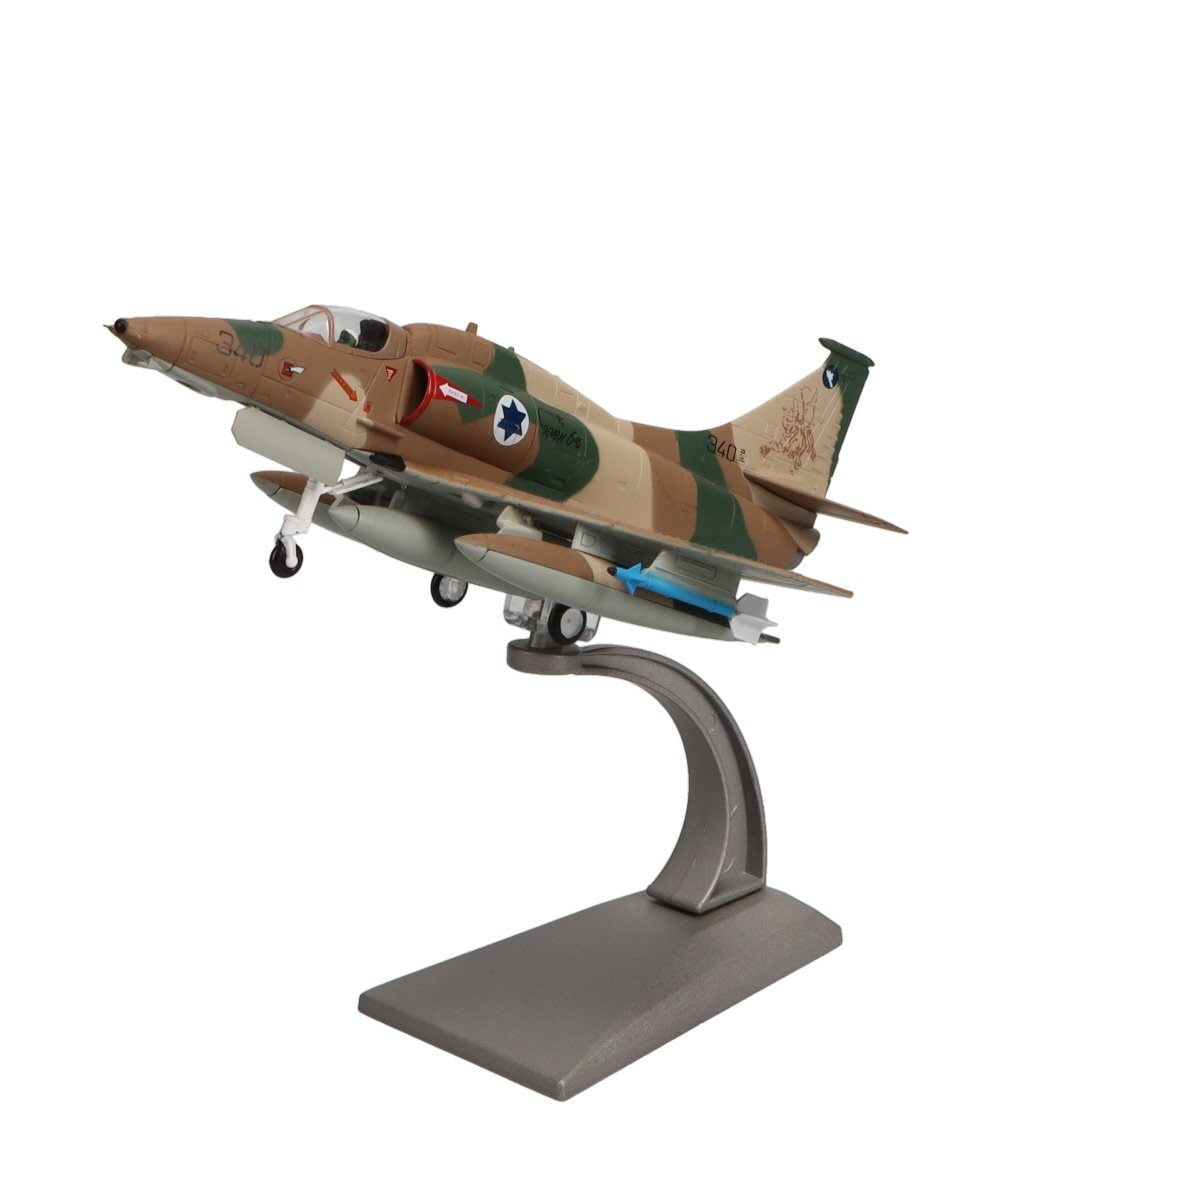 1/72 Scale  A-4 Skyhawk Fighter Aircraft Diecast Metal Model & Stand 